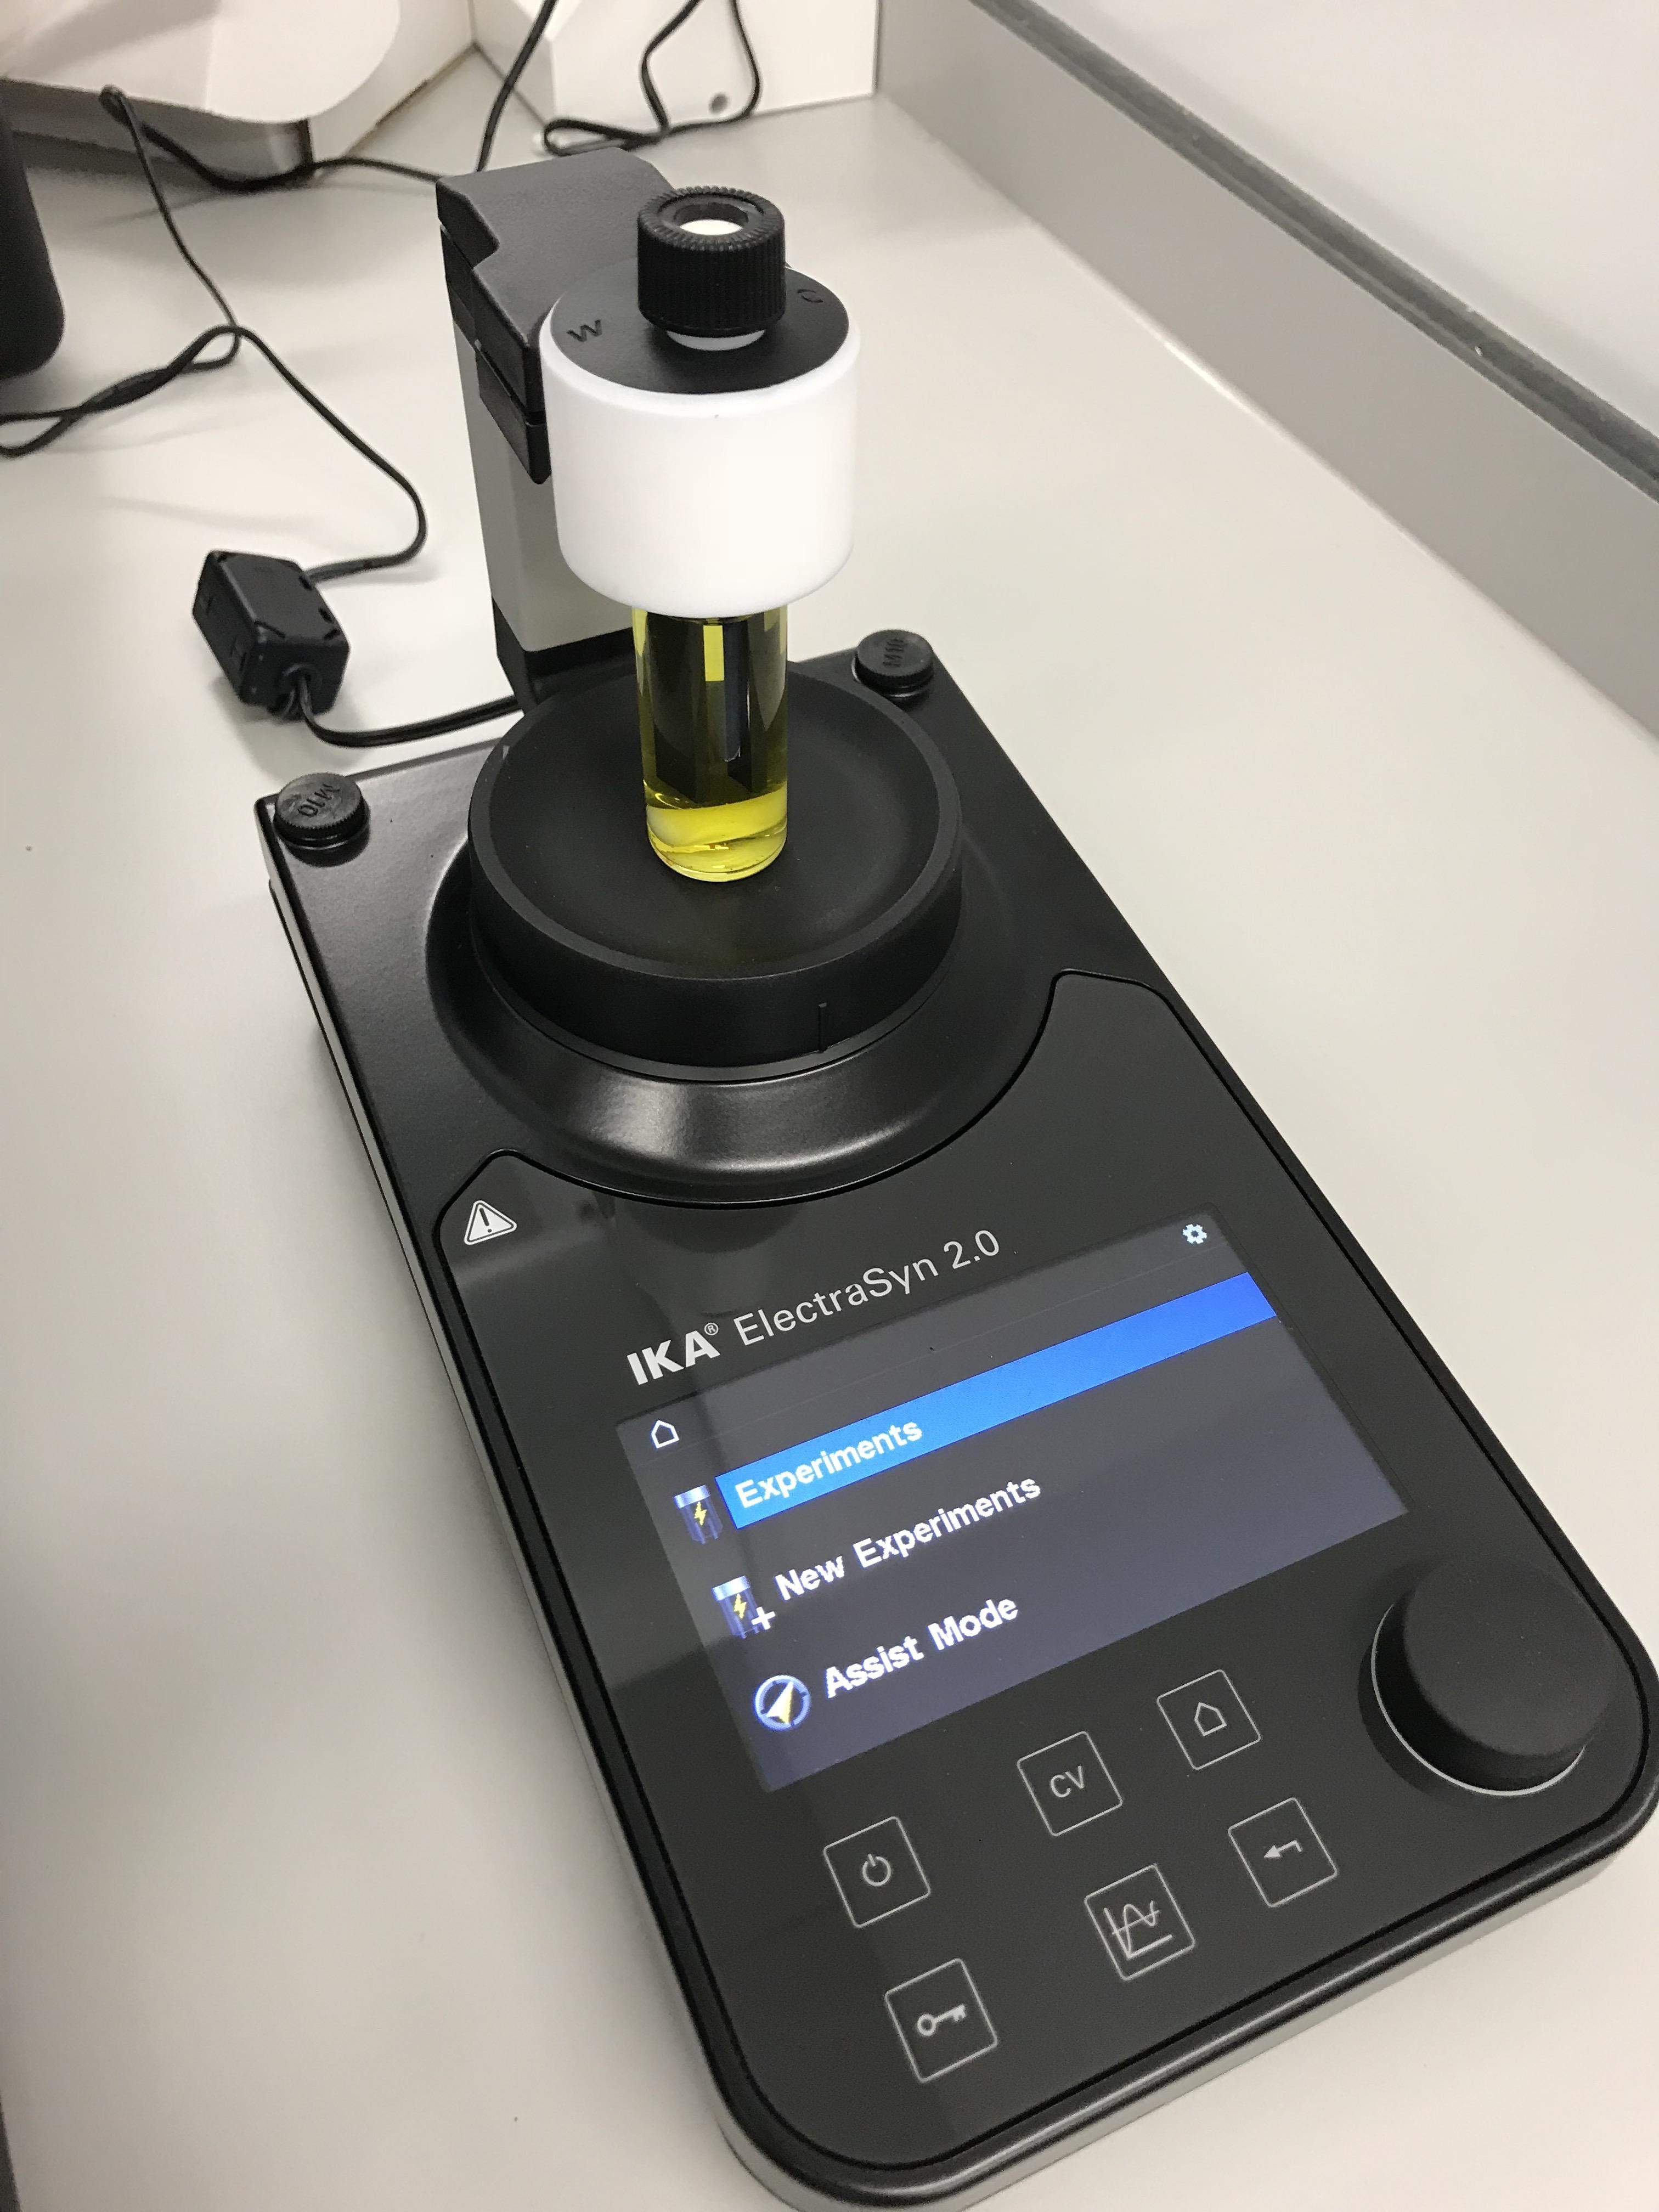 Electrasyn 2.0 is a modern way to perform electrosynthesis in the lab